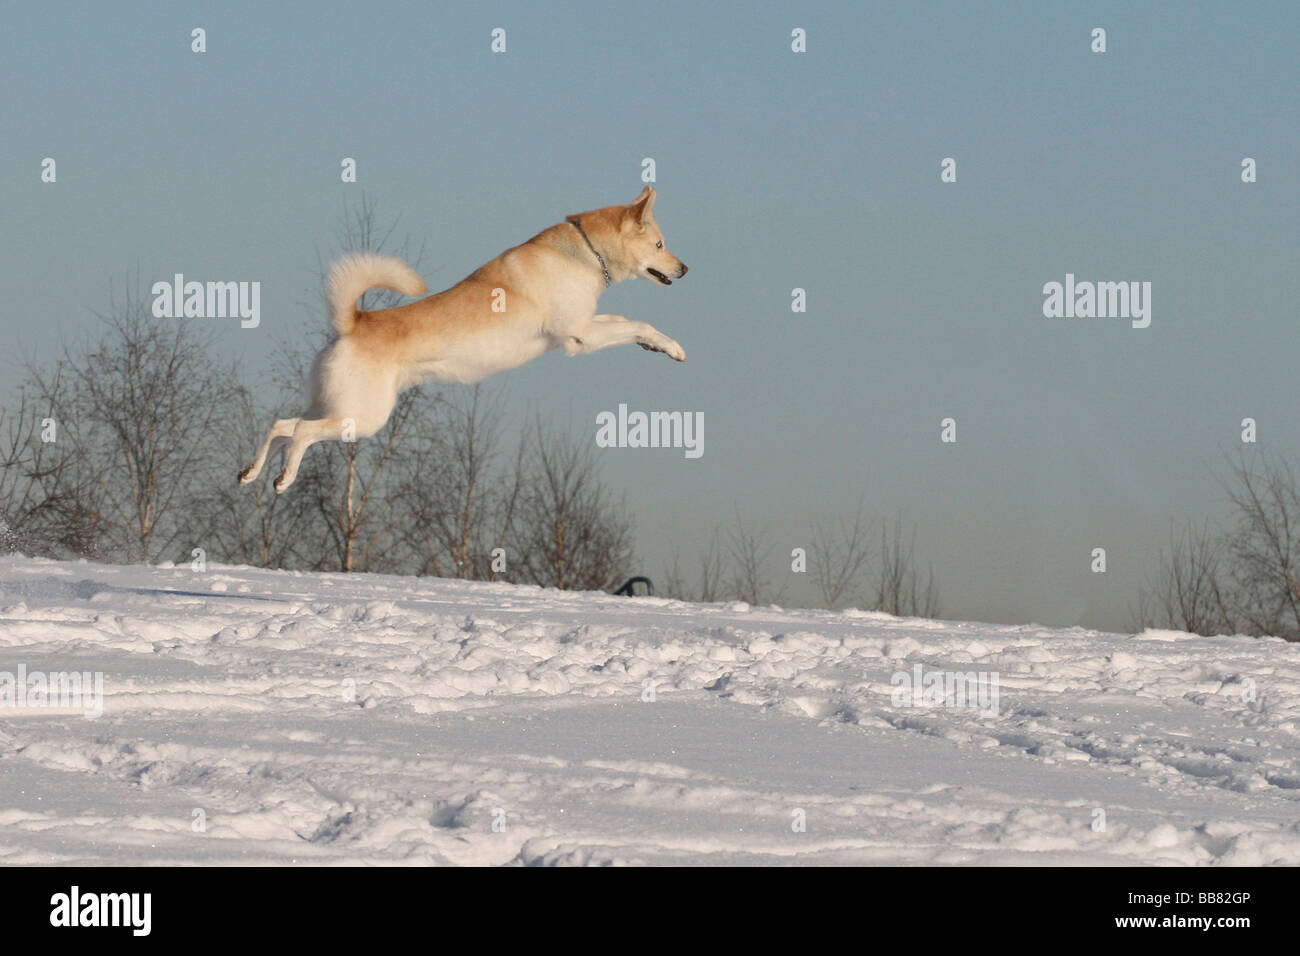 Male Siberian Husky, 5 years old, jumping and running through snow Stock Photo